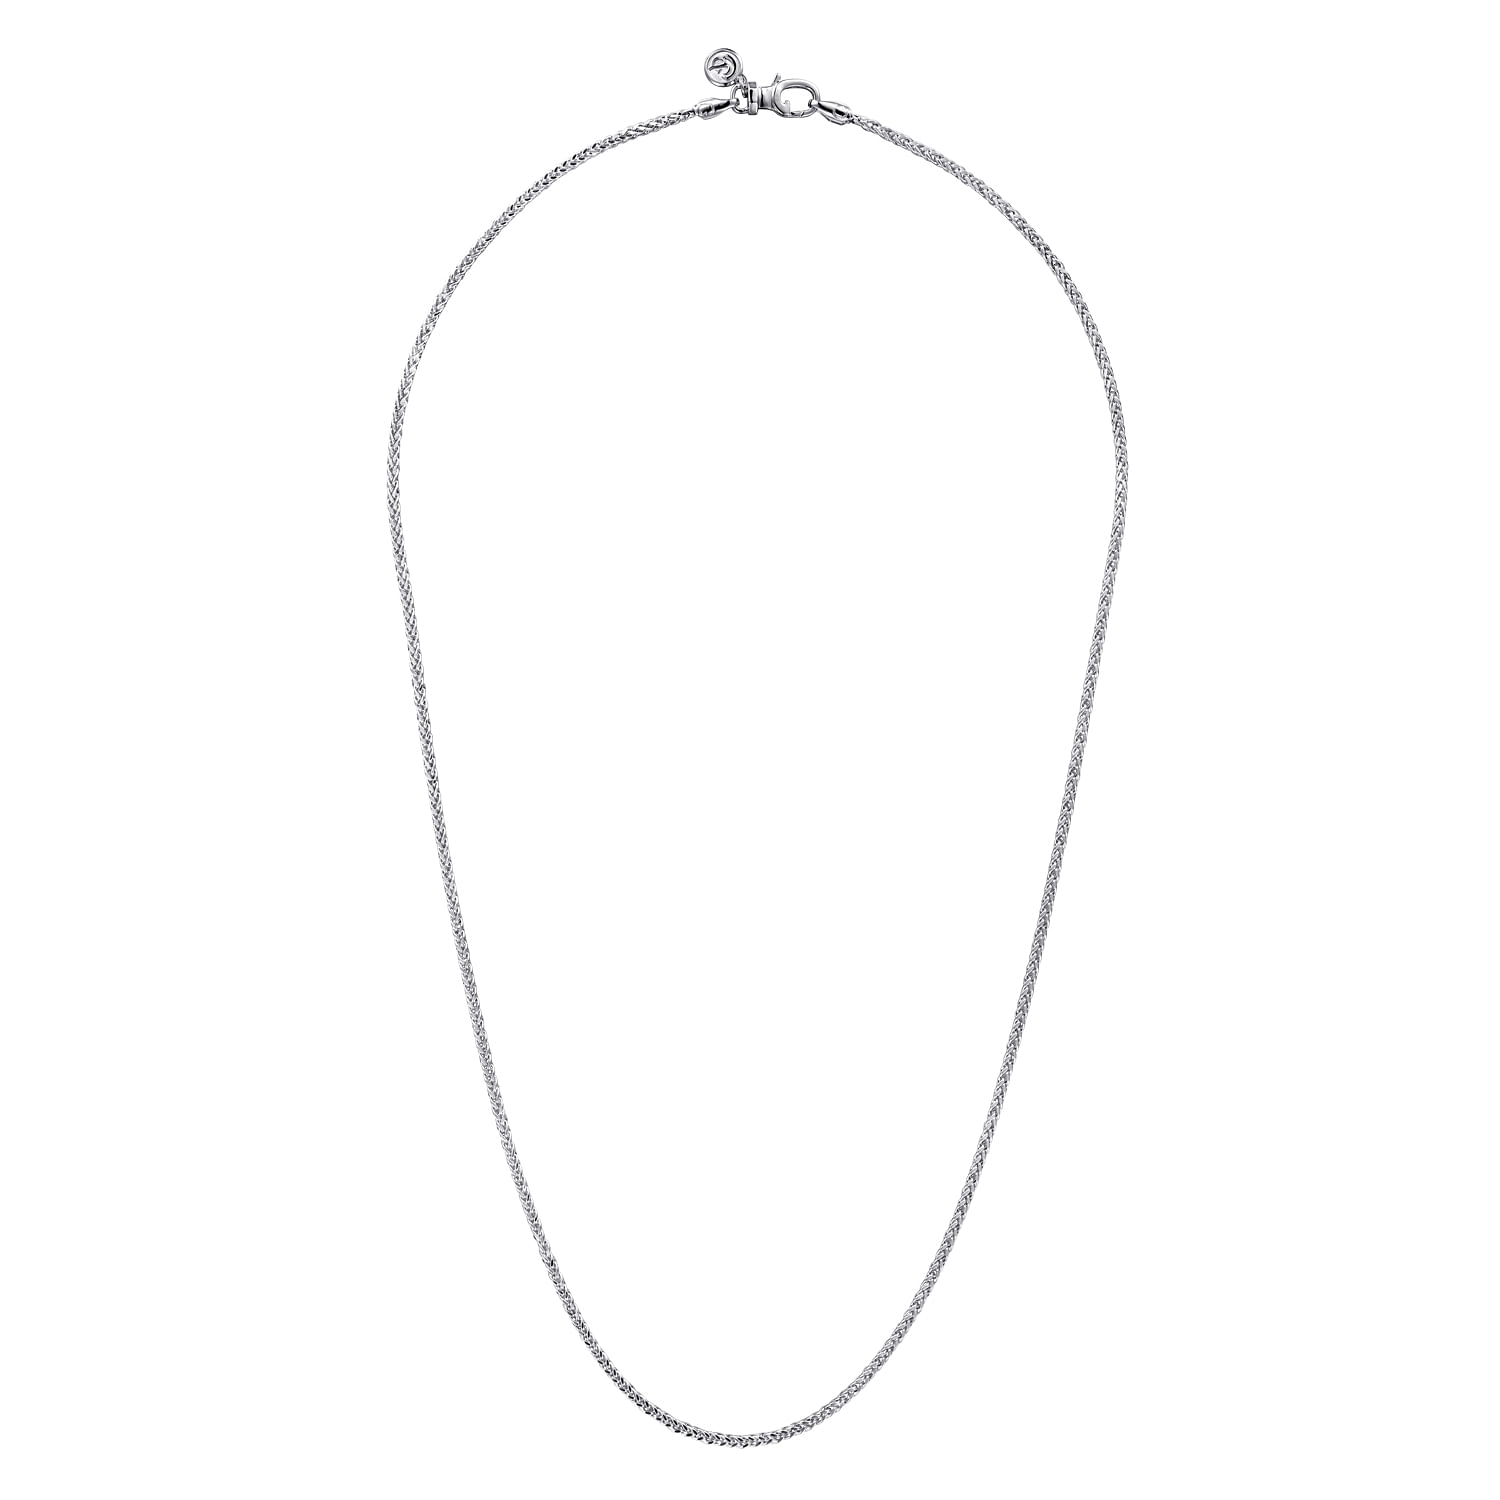 22 Inch 925 Sterling Silver Men's Wheat Chain Necklace